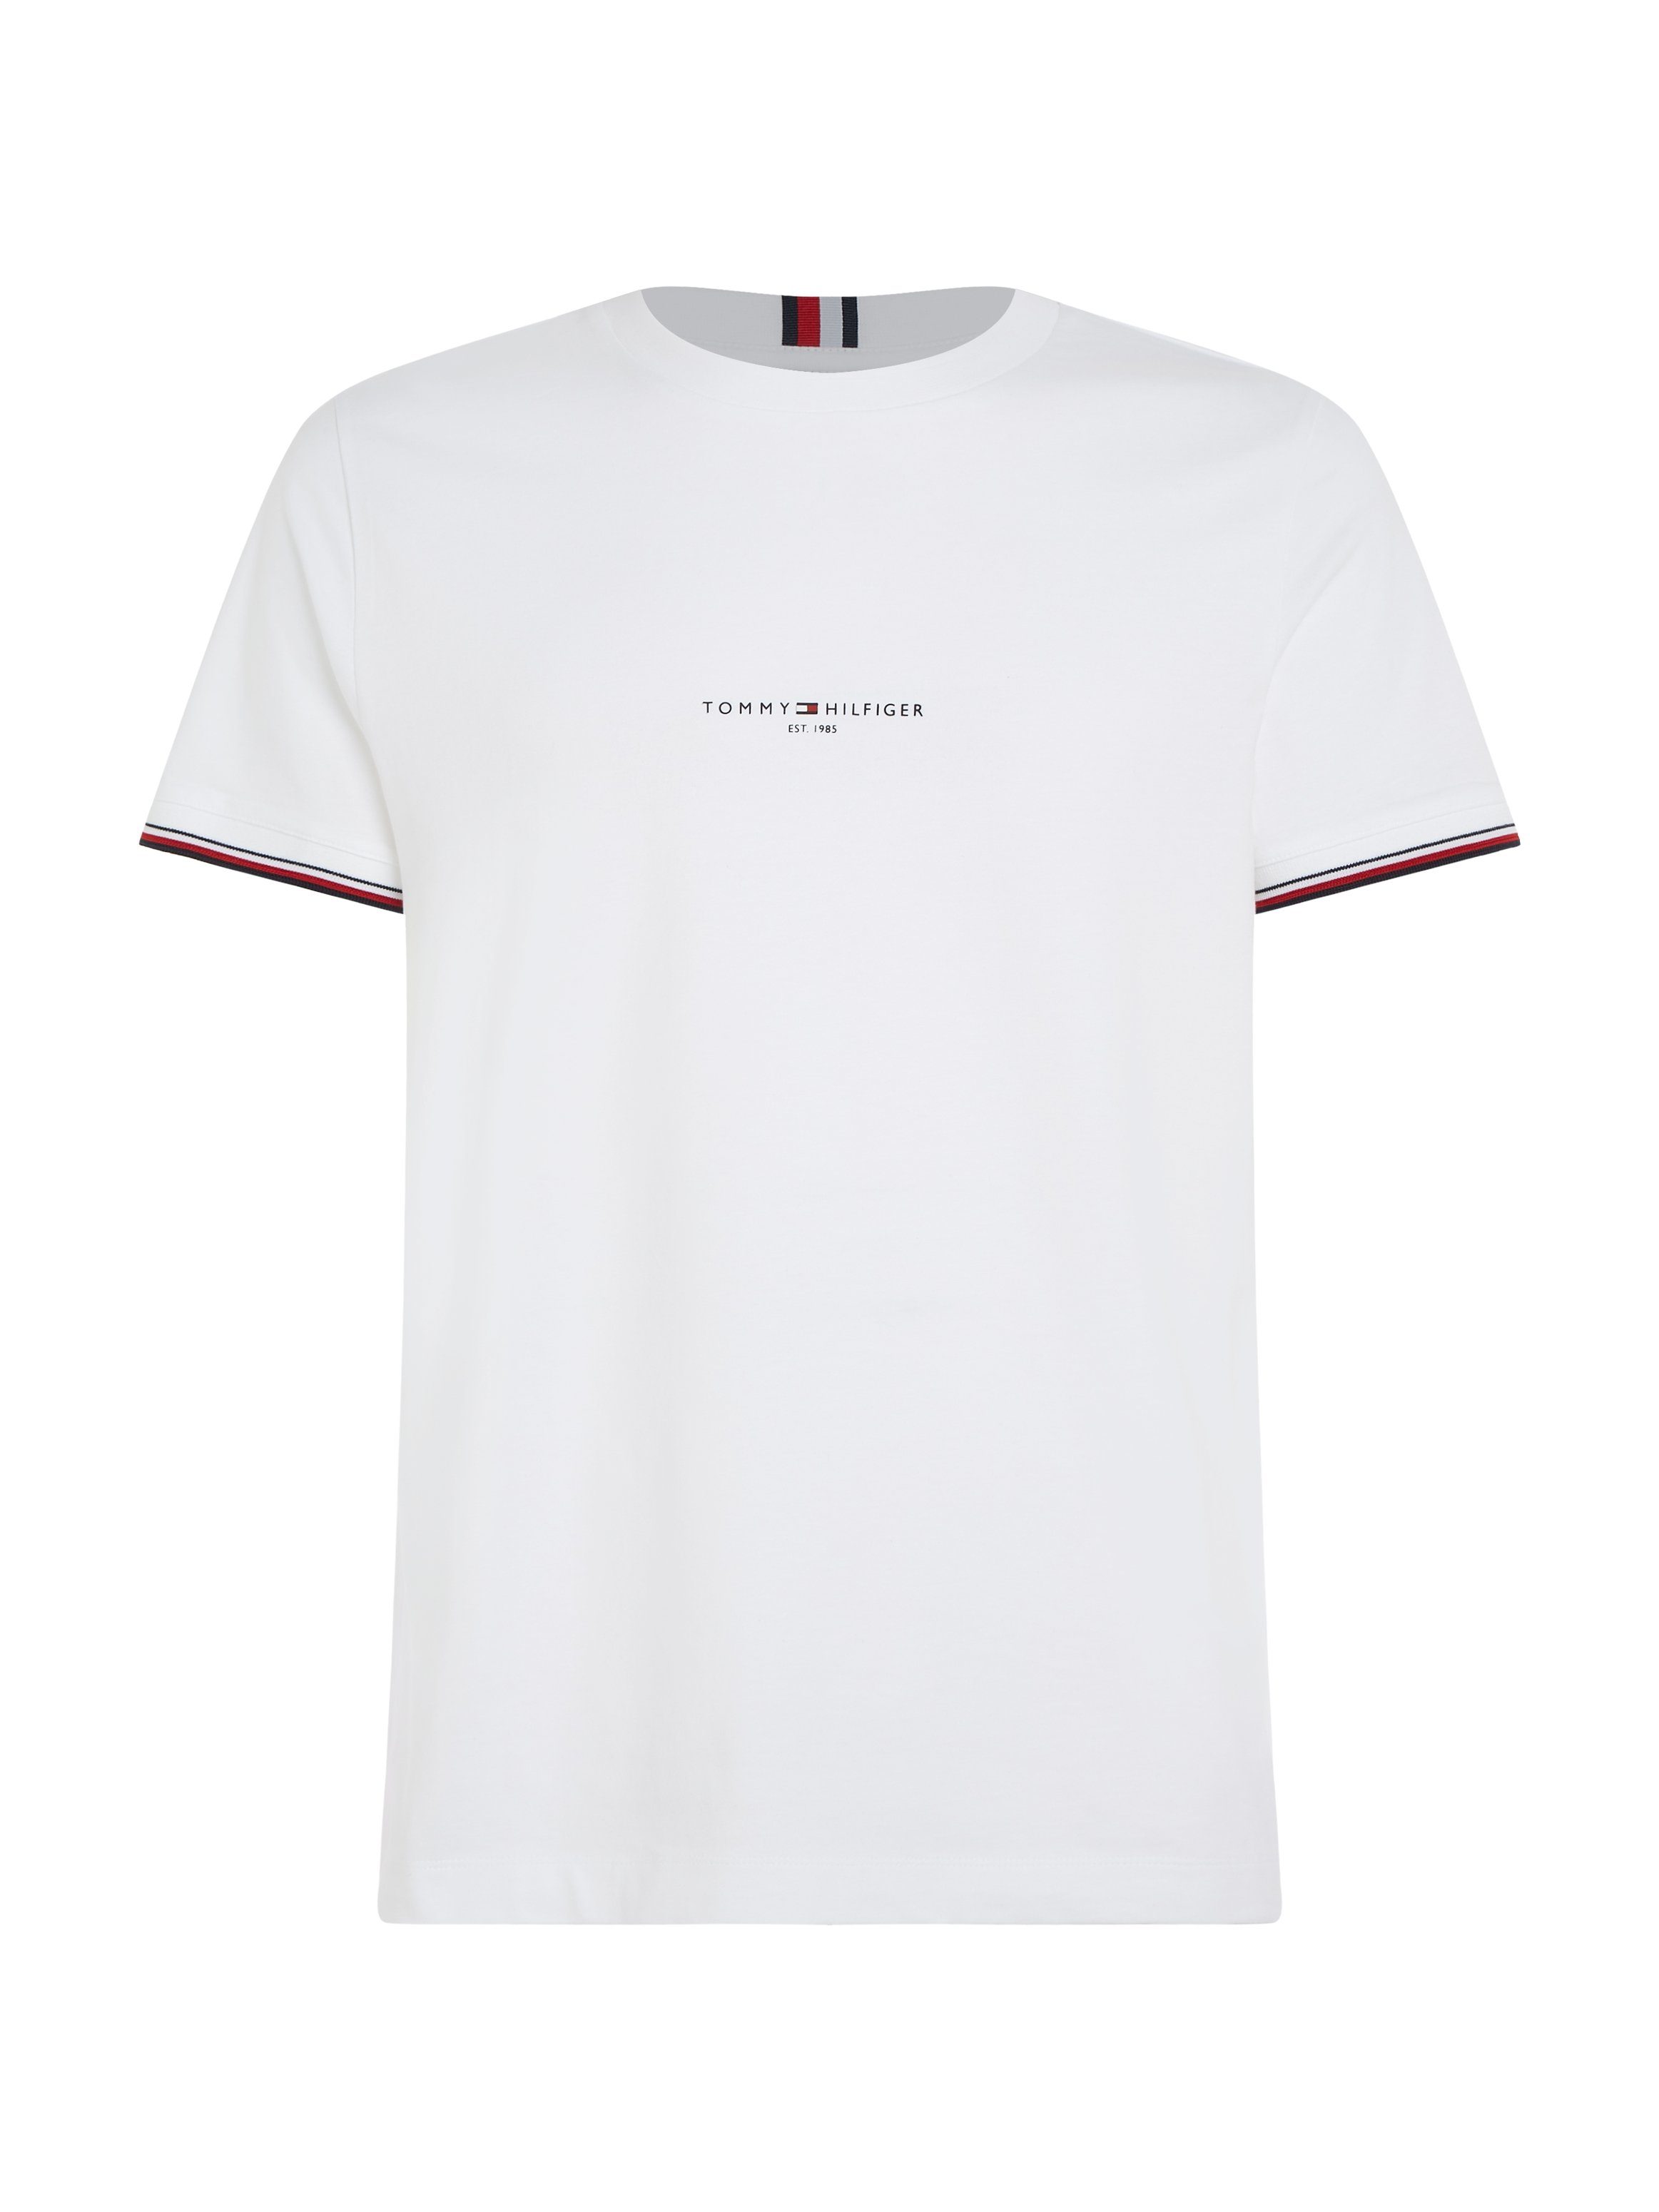 T-Shirt White TIPPED Hilfiger TOMMY Tommy TEE LOGO